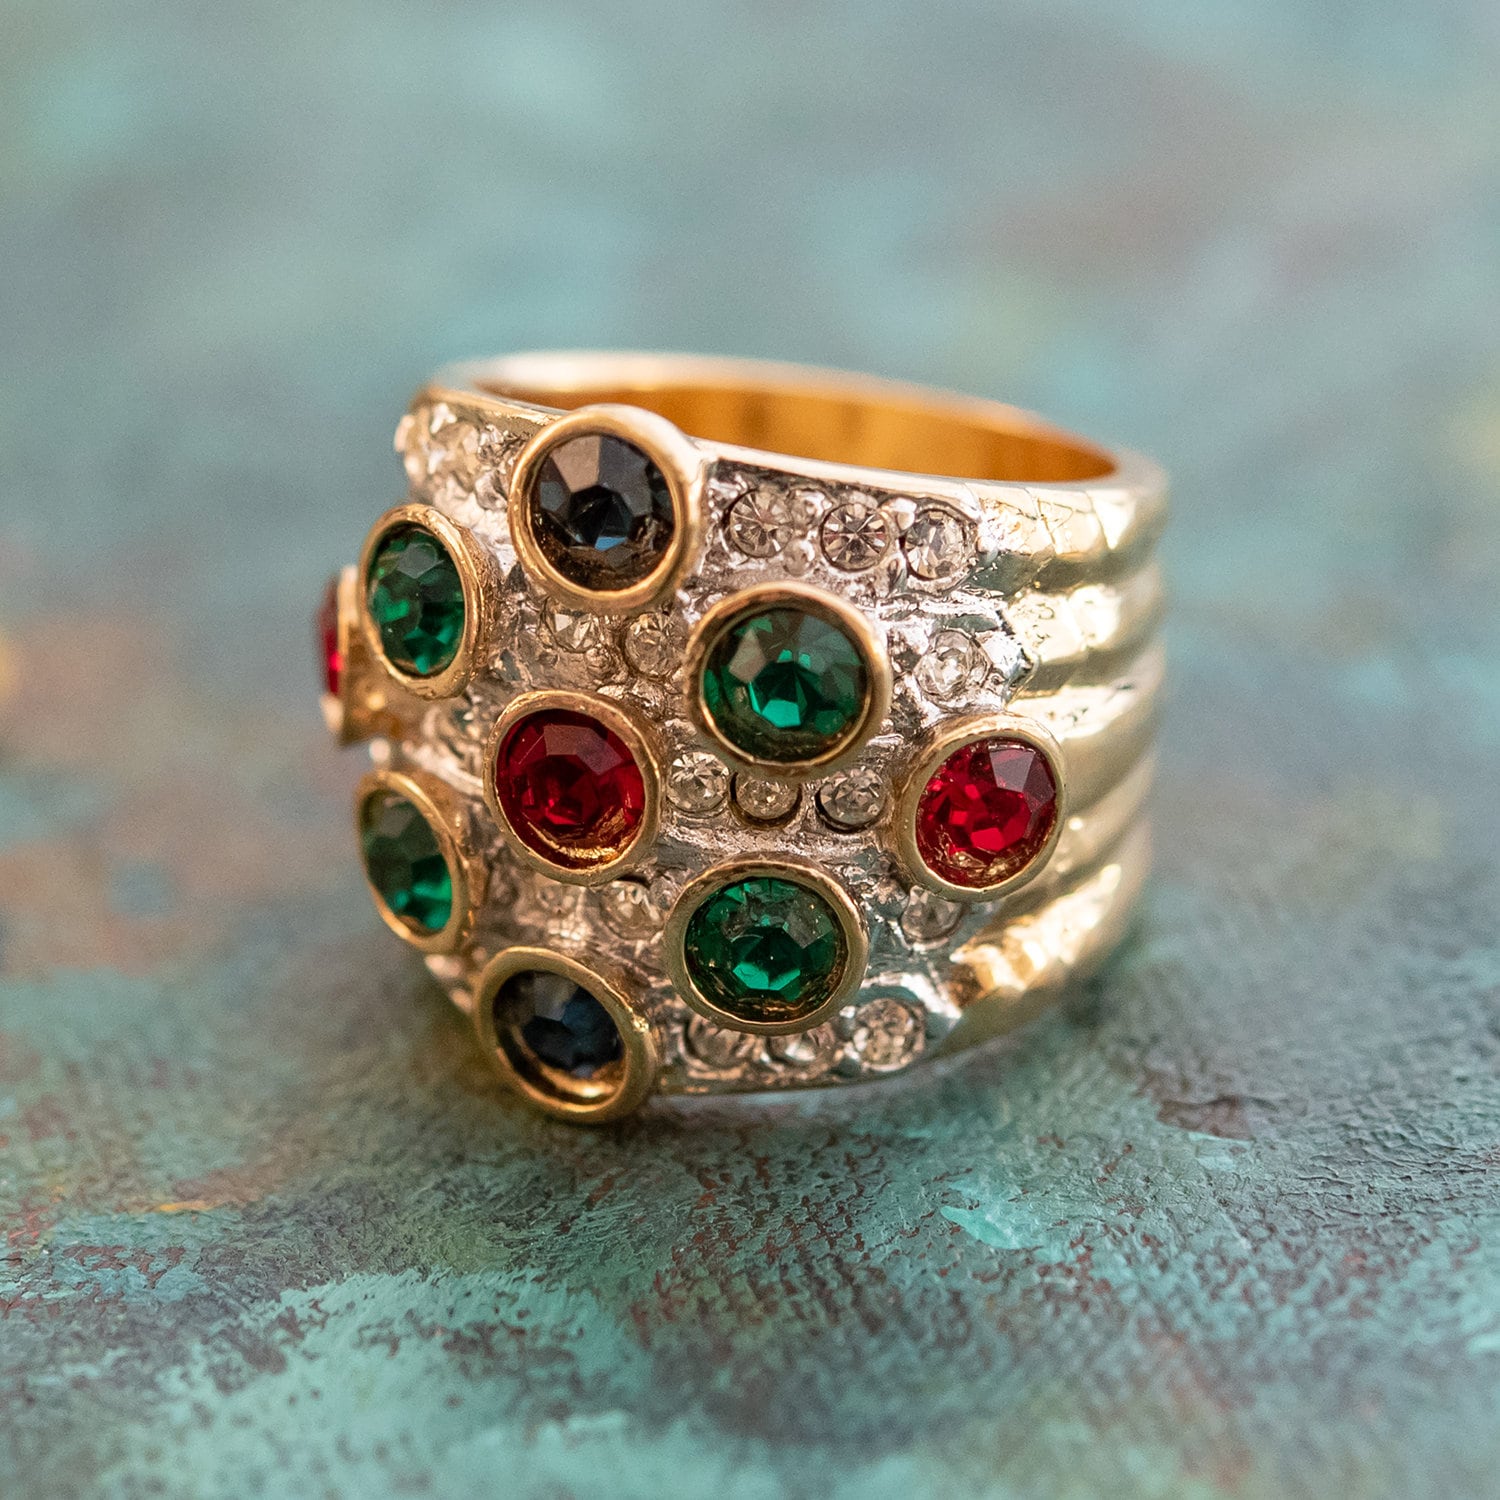 Vintage Ring Pave Multi Color and Clear Swarovski Crystal Ring 18k Gold  R3111 - Limited Stock - Never Worn